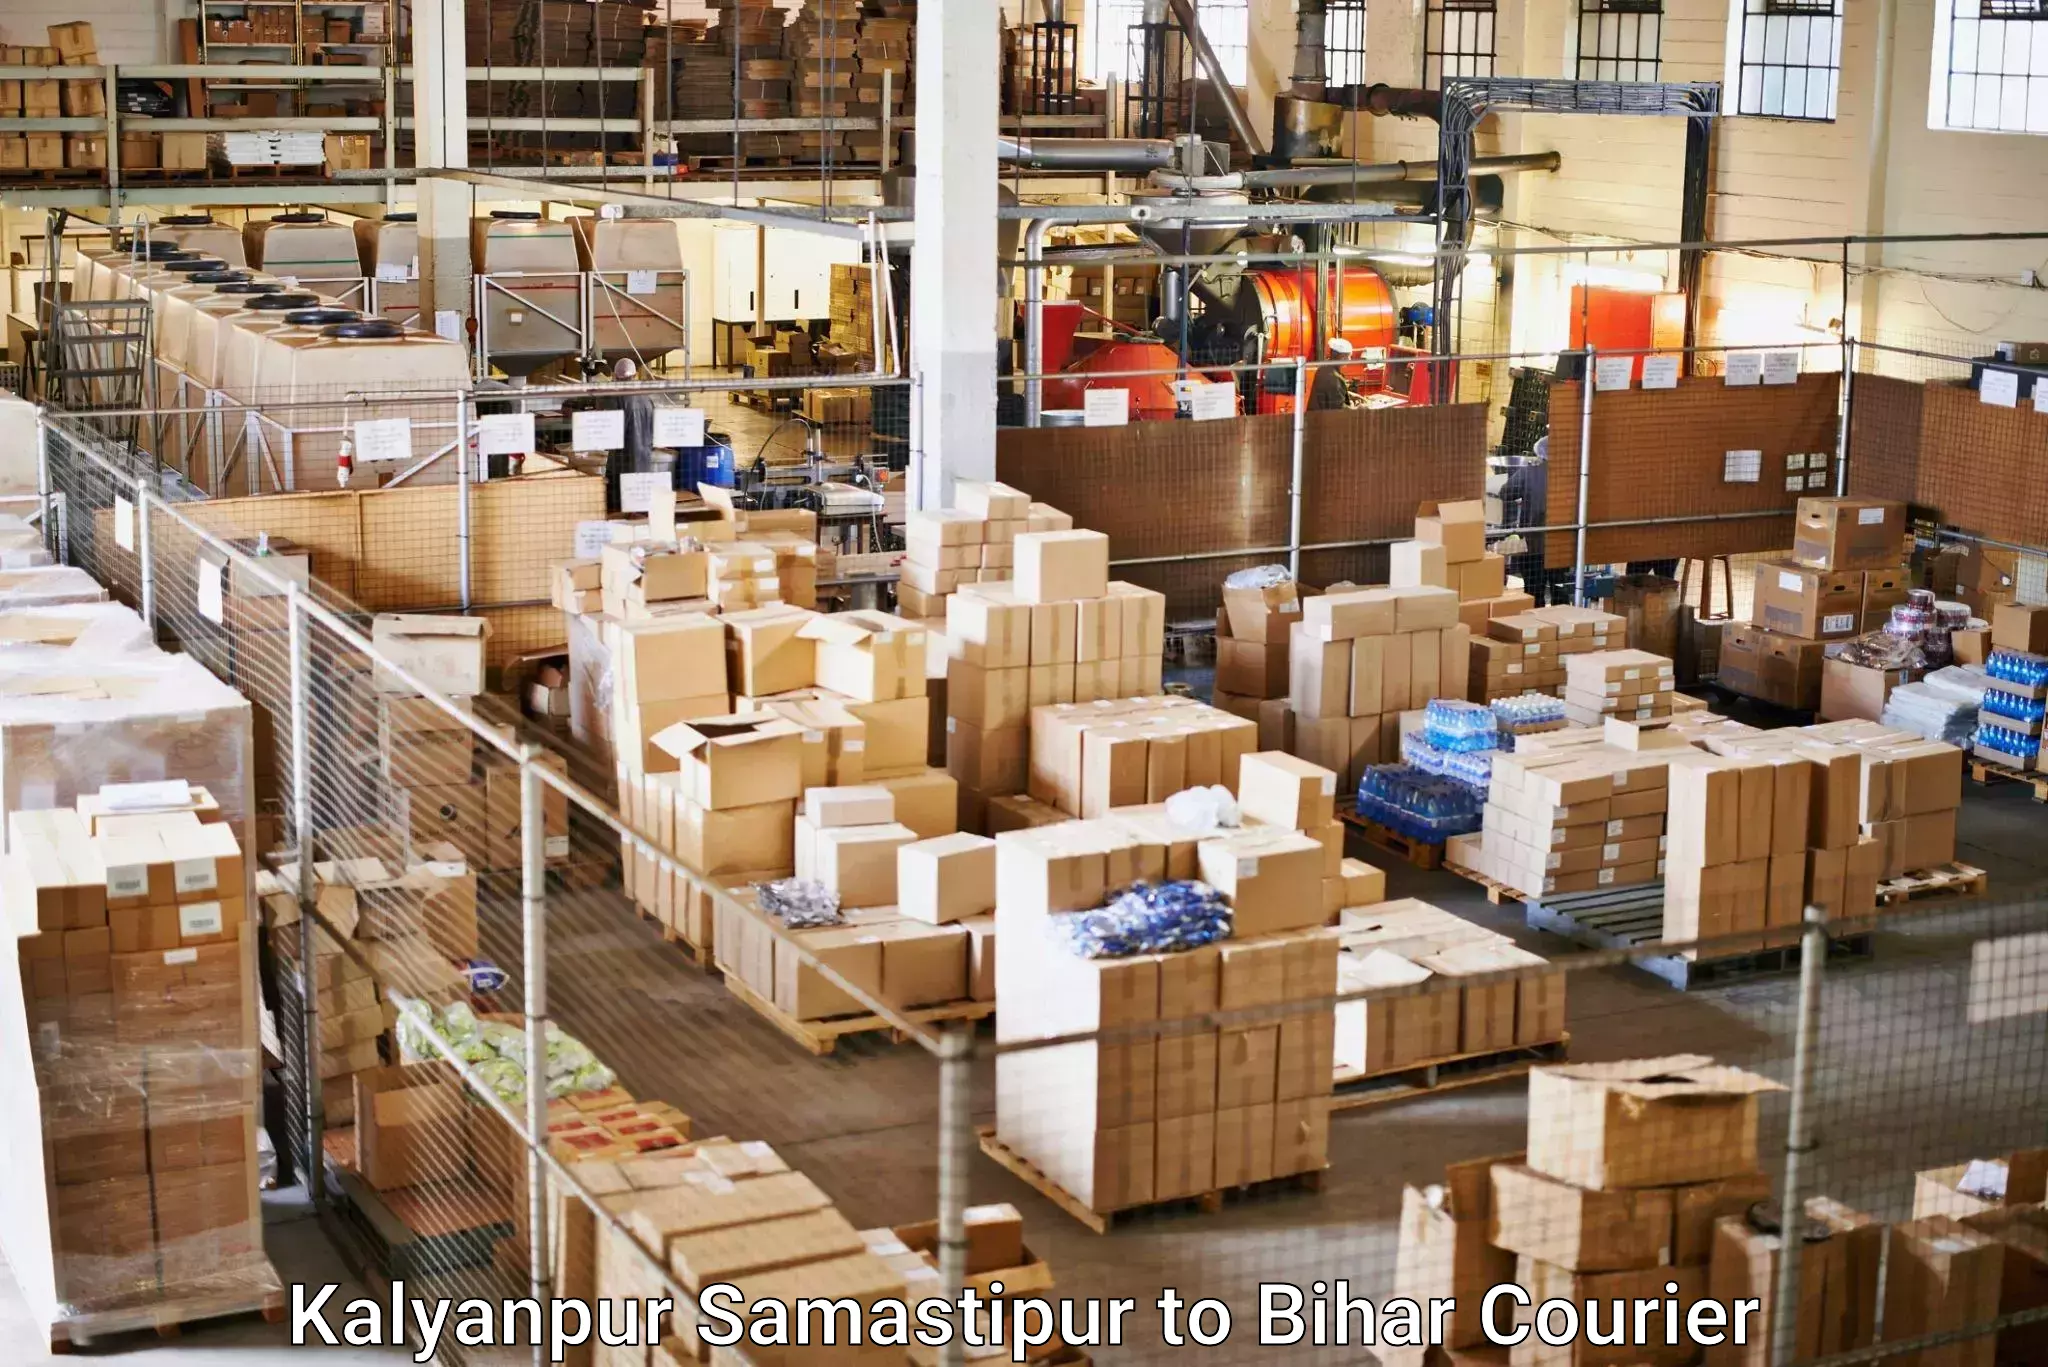 Budget-friendly shipping in Kalyanpur Samastipur to Sheohar